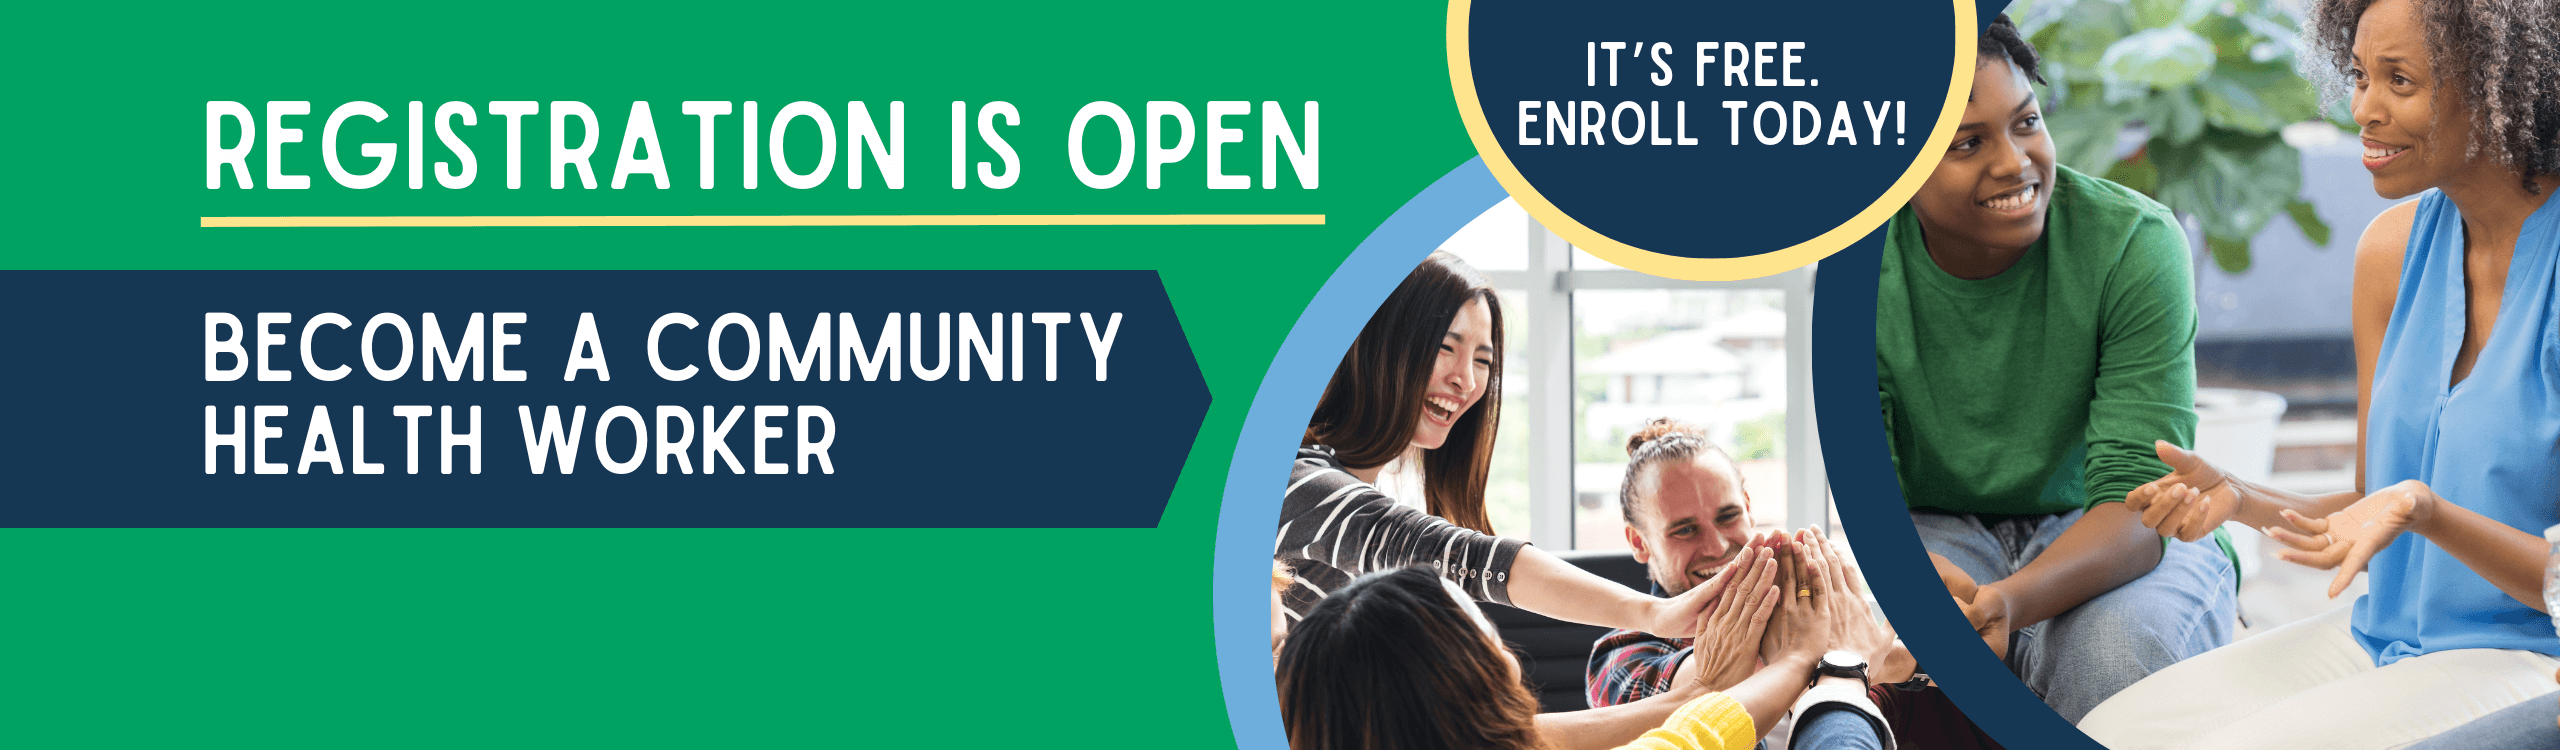 Registration is open. Become a community health worker. It's free, enroll today!